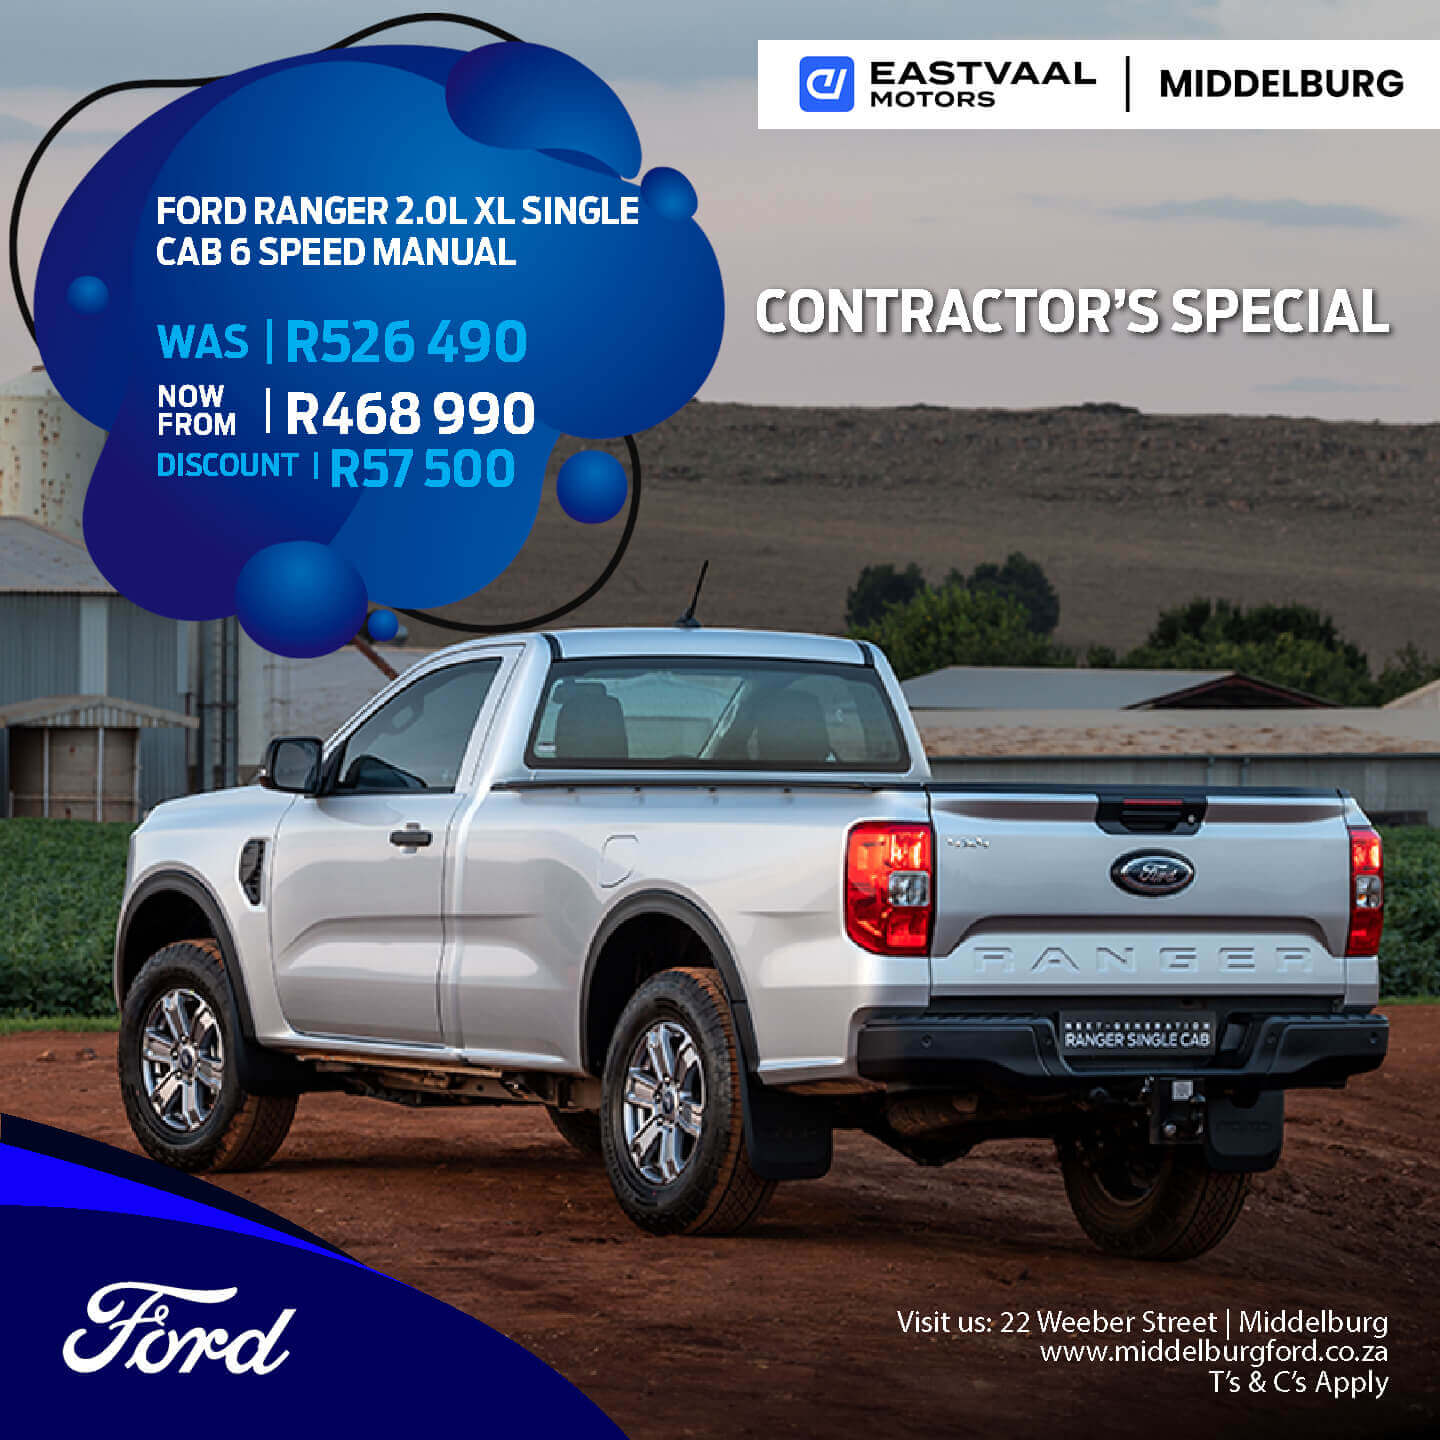 FORD RANGER 2.0L XL image from Eastvaal Motors